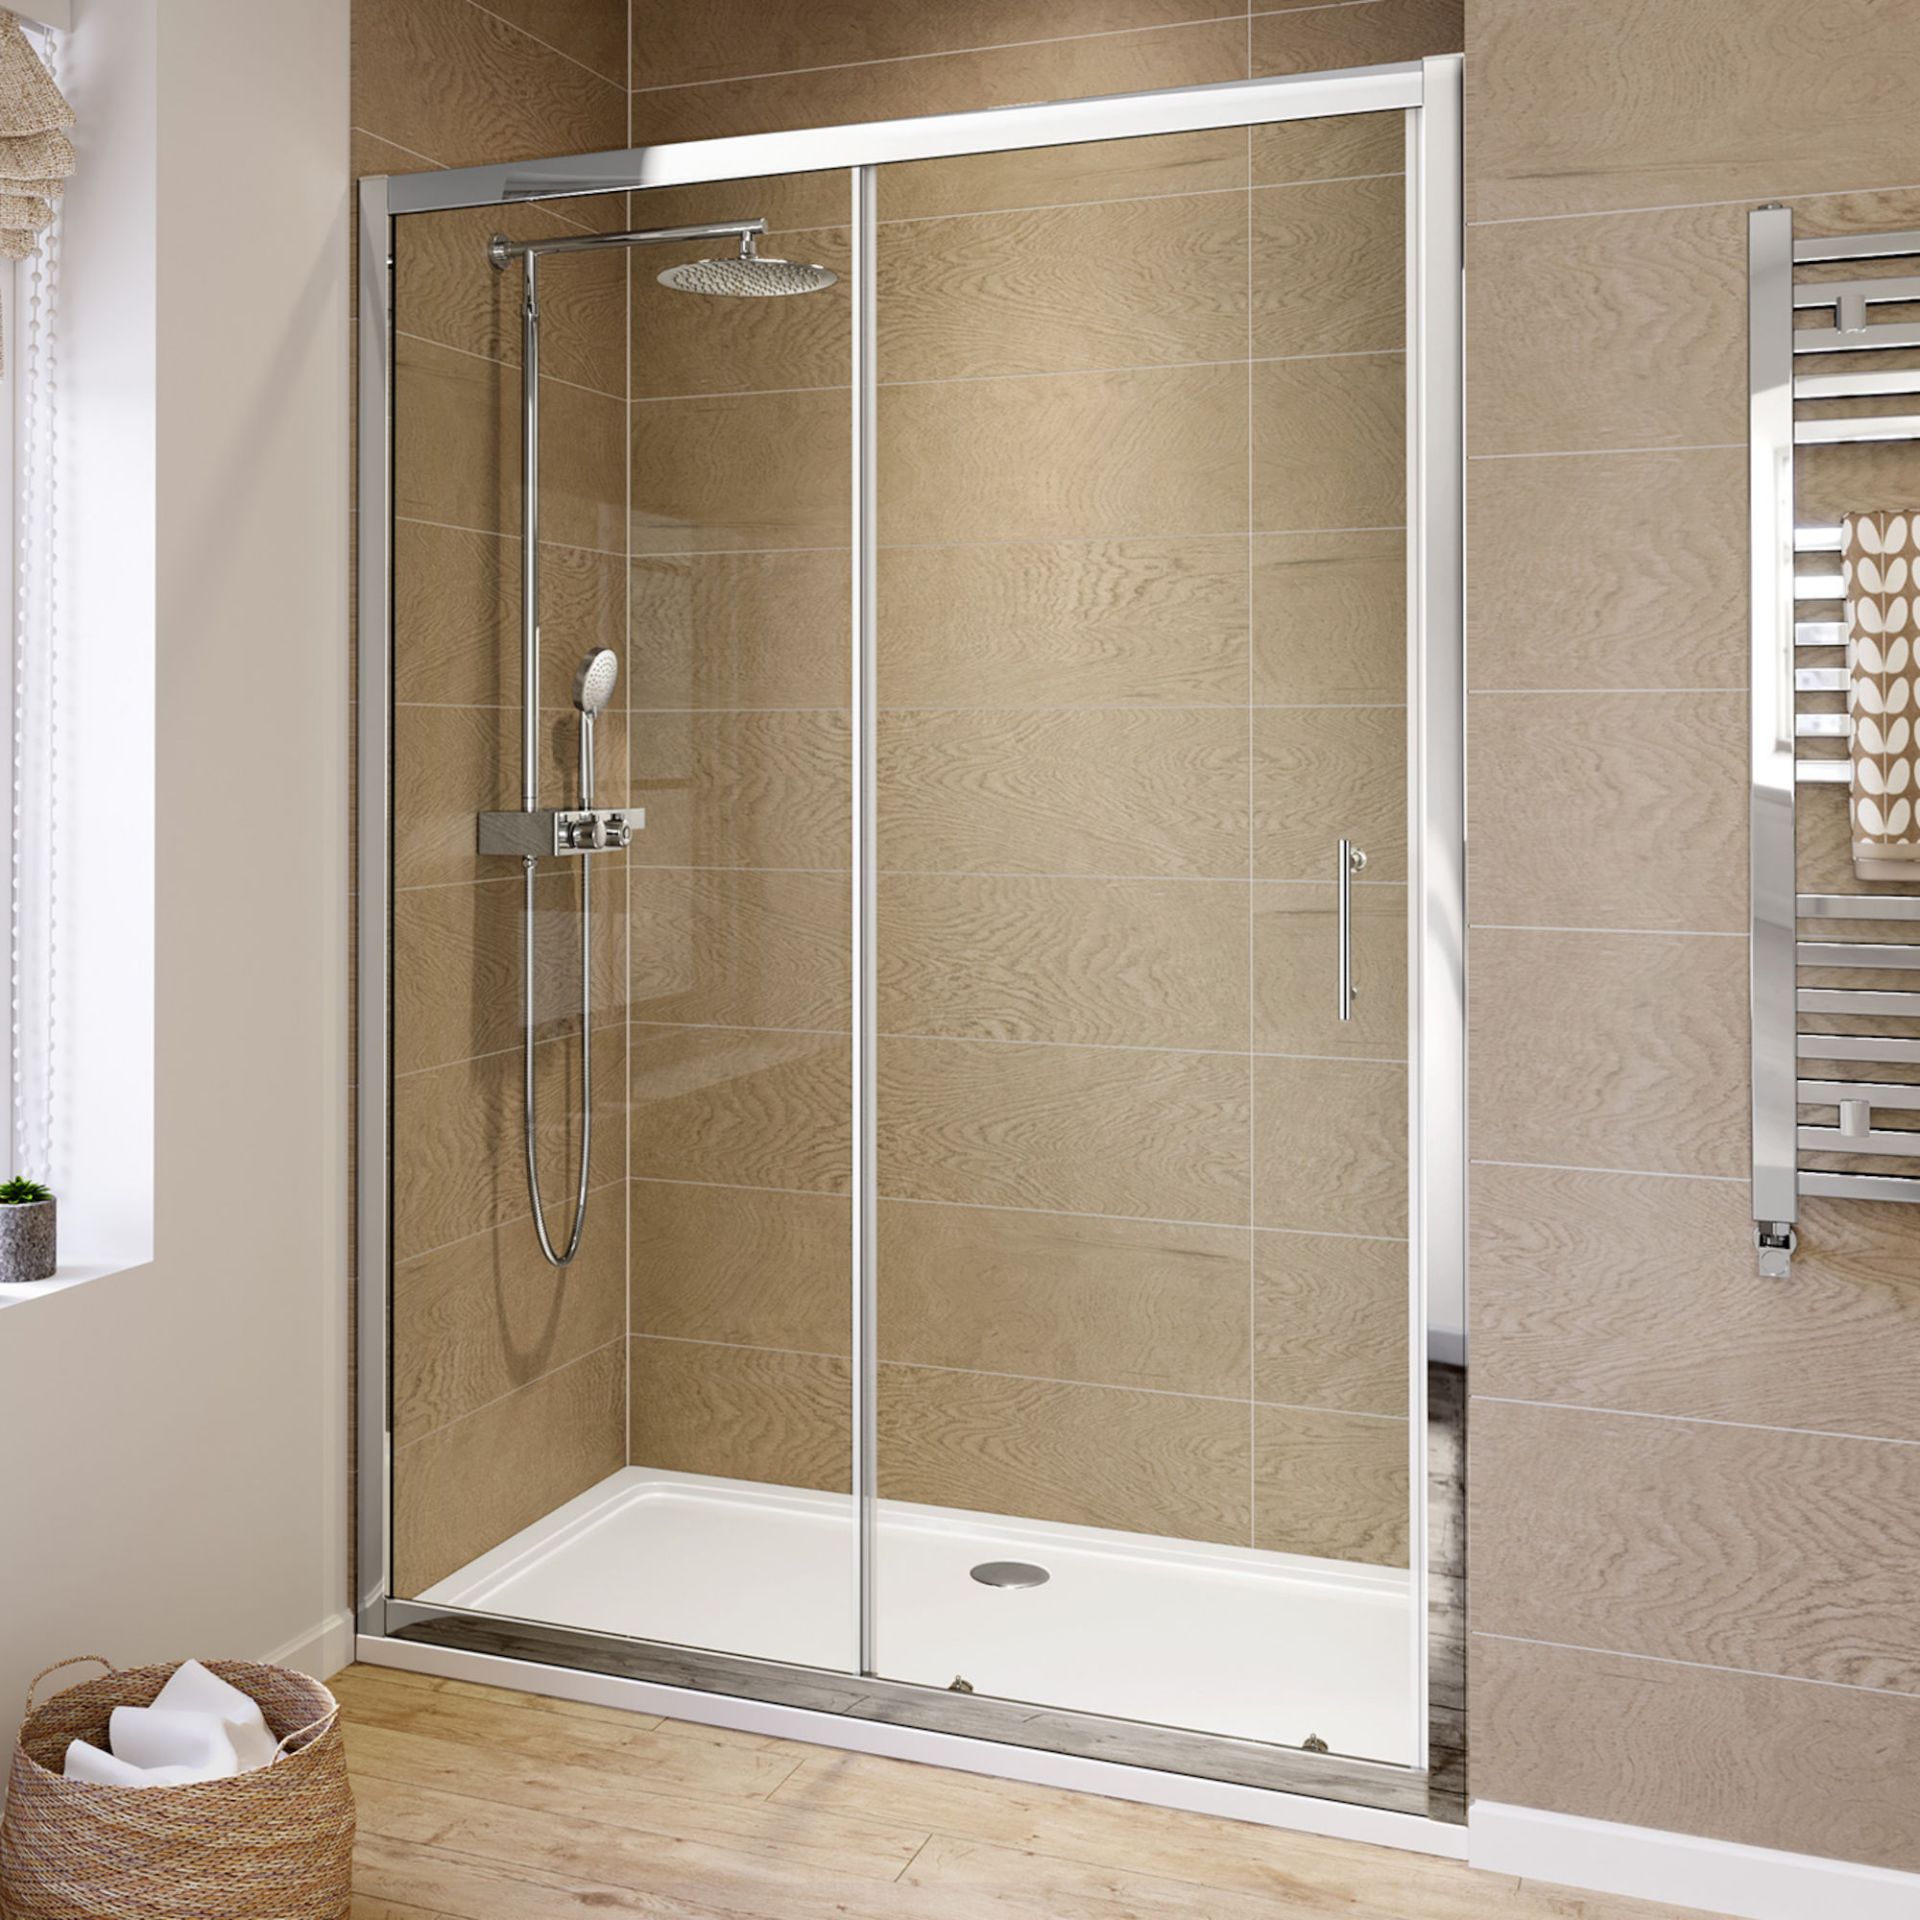 (XM153) 1400mm - 6mm - Elements Sliding Shower Door. RRP £299.99. 6mm Safety Glass Fully